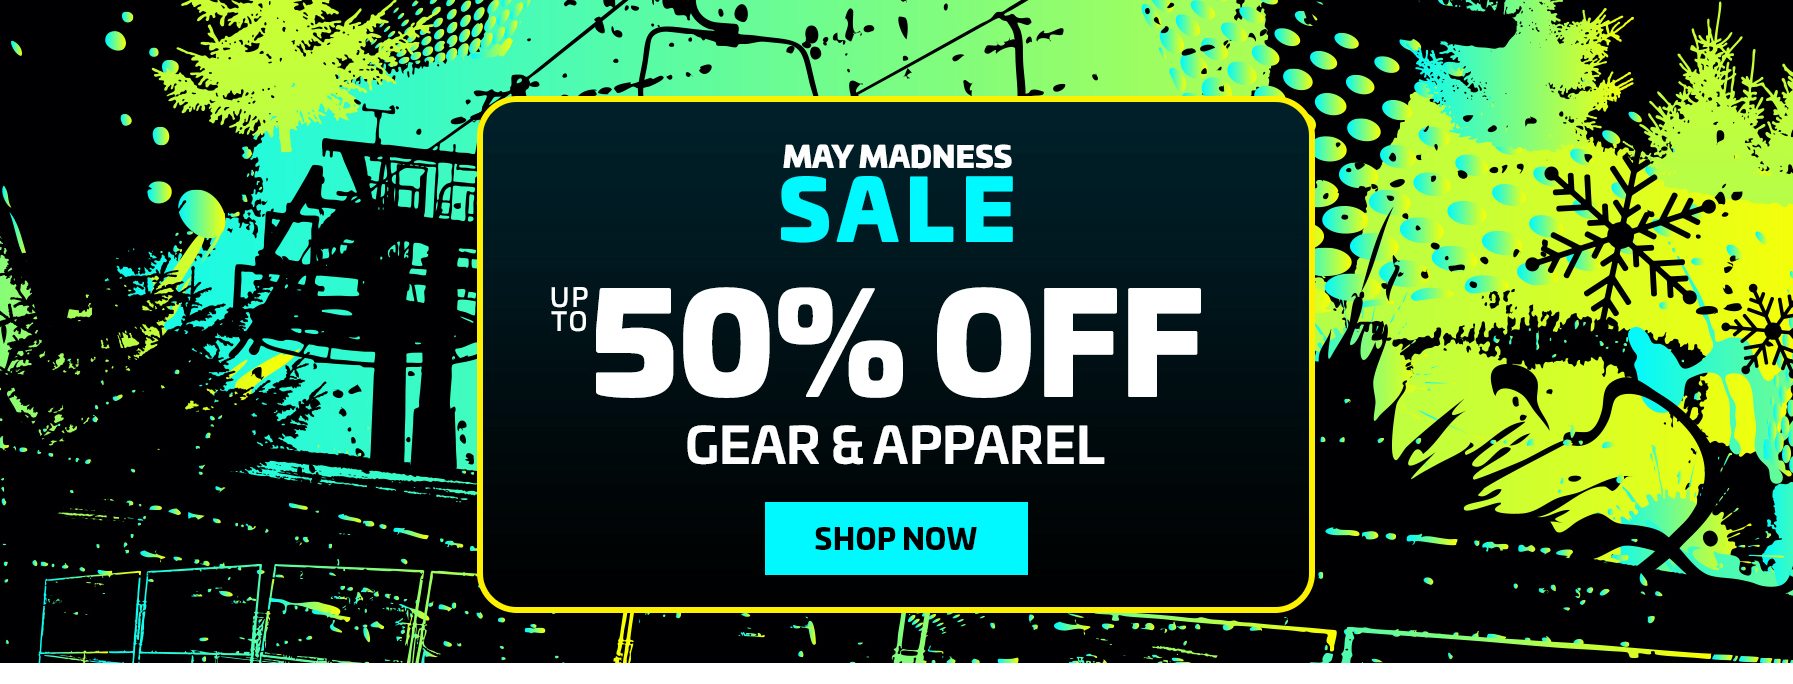 SHOP THE MAY MADNESS SALE